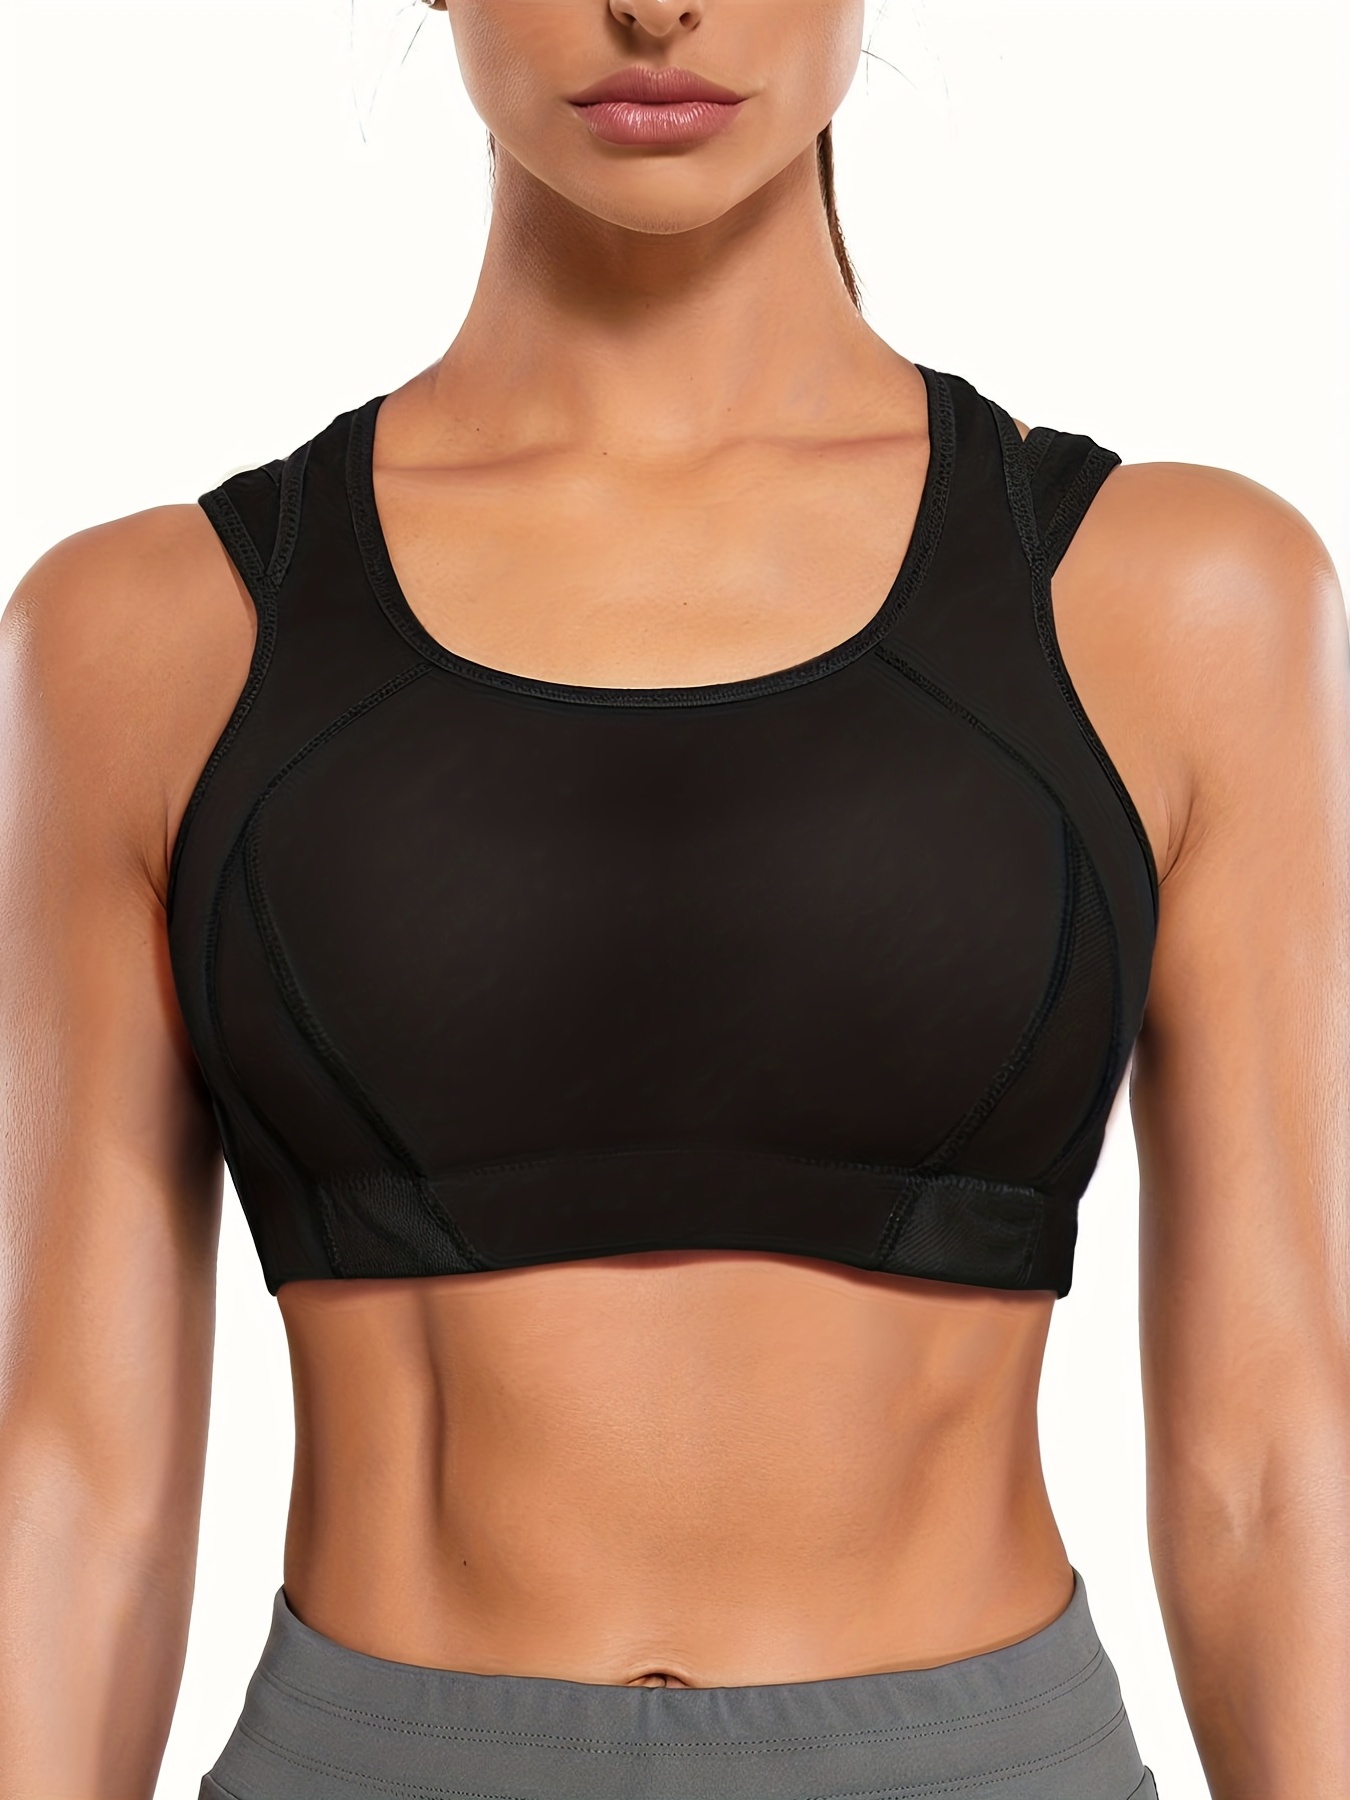 Is That The New High Support Contrast Binding Color-block Sports Bra ??